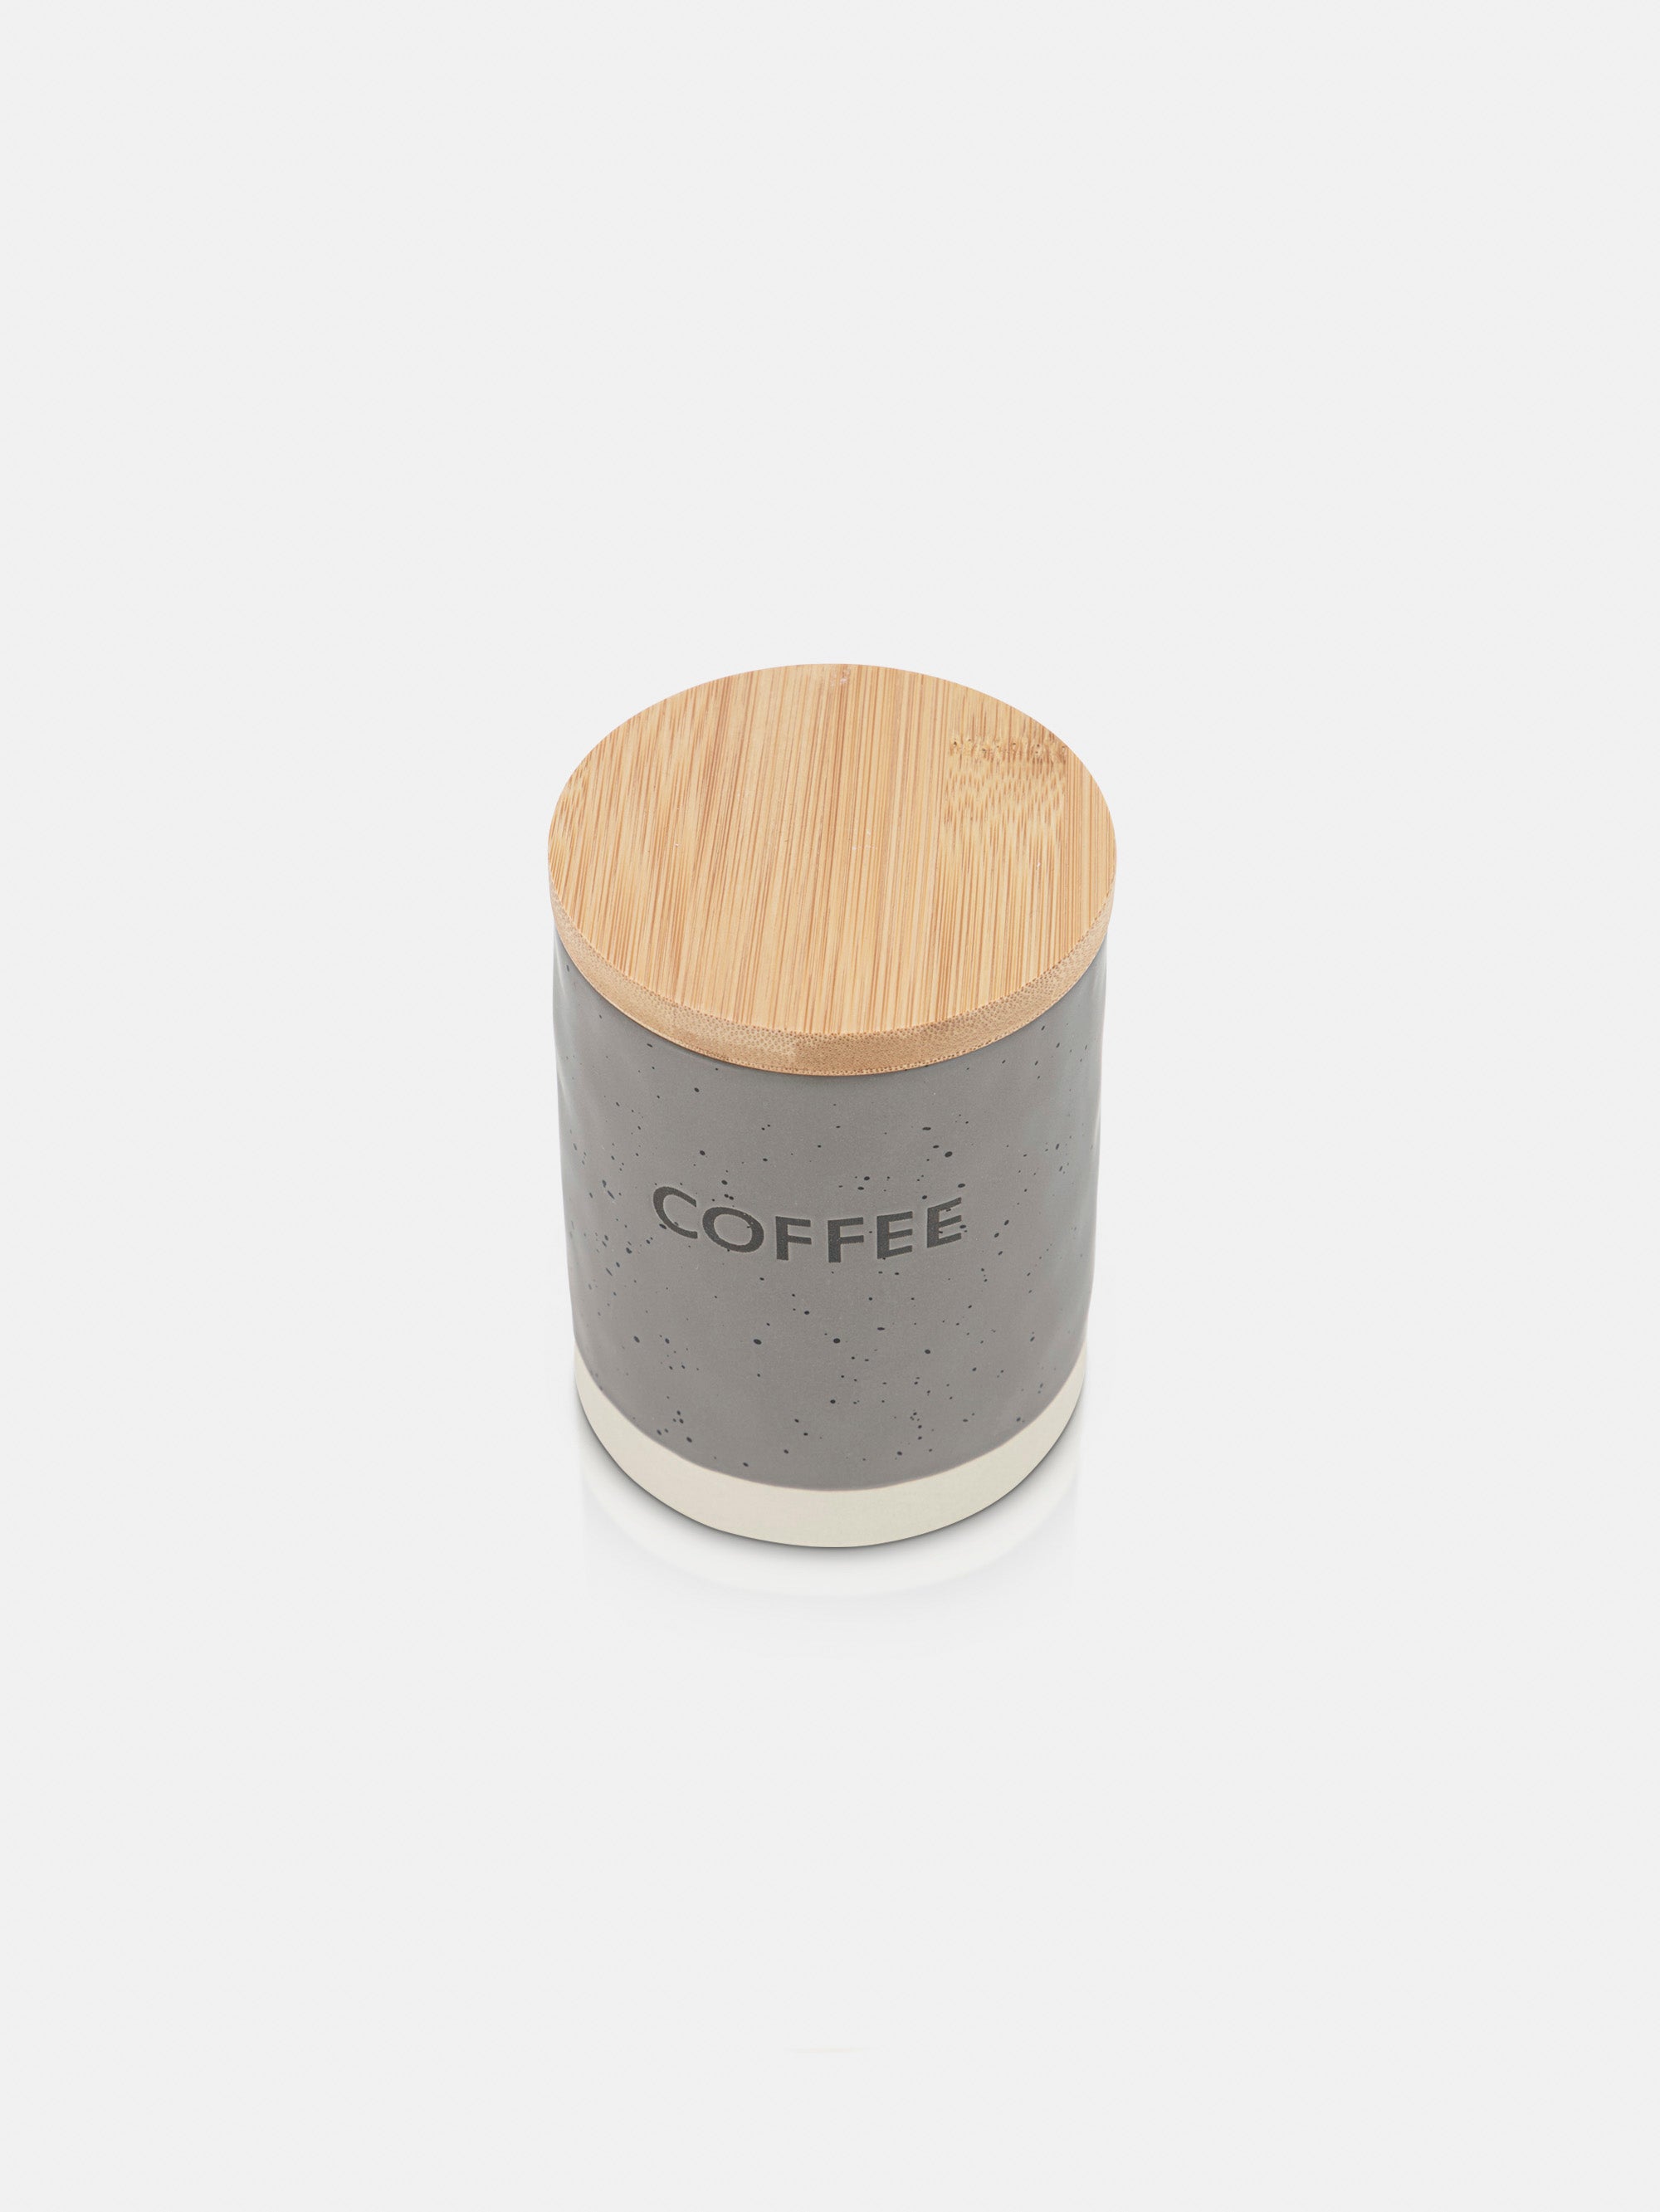 ROY coffee Storage Canister